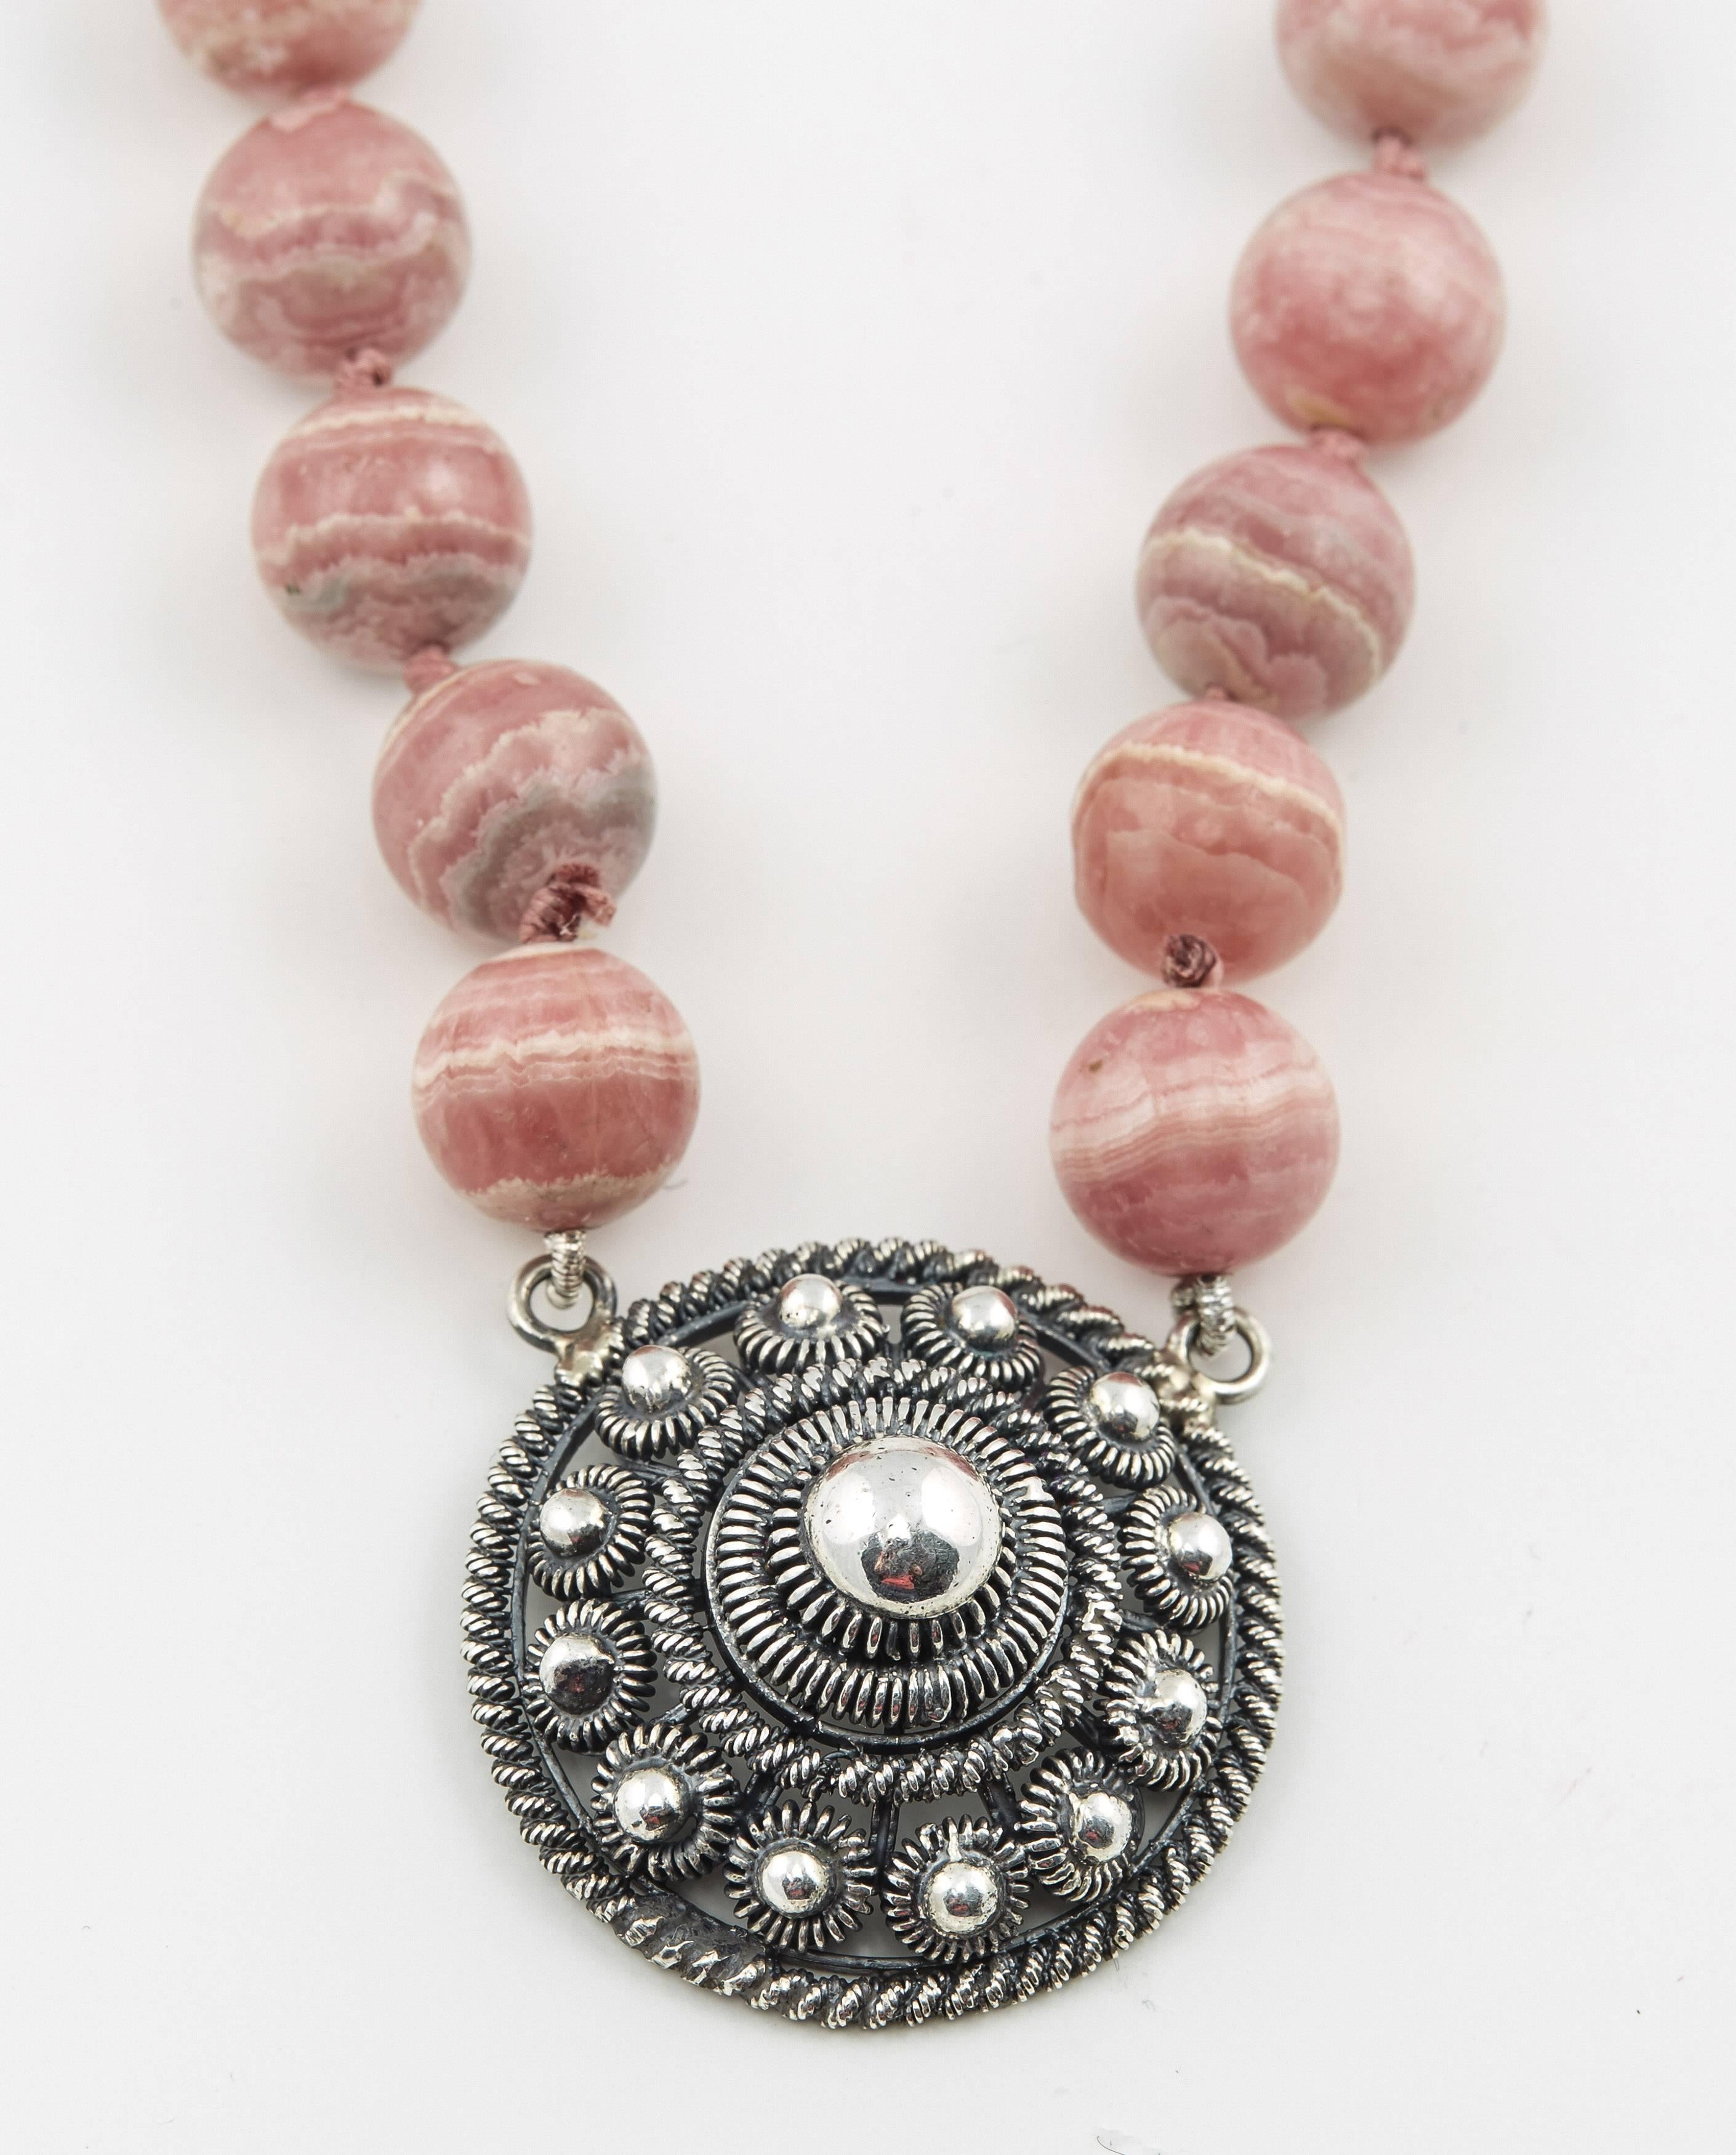 Distinctive necklace consisting of sixty five natural rhodochrosite beads attached to a filigree silver pendant, with a silver clasp. 

20th century

28 in. (71.1 cm.) long, the pendant, 1 ¼ in. (3.2 cm.) diam.   

Found in Russia and elsewhere,